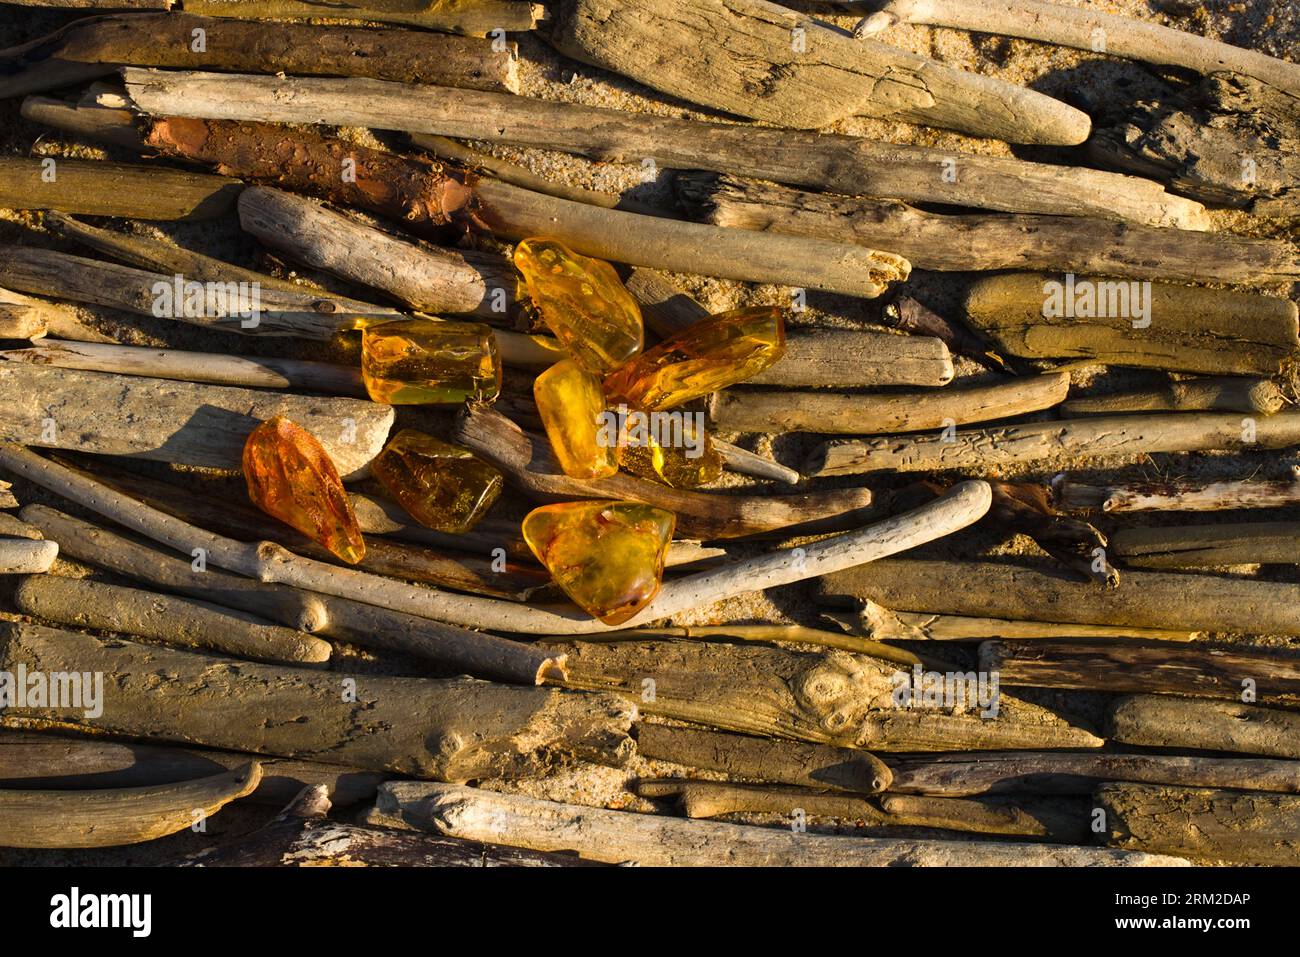 Large nuggets of polished Baltic amber on dry branches washed up by the sea. Beach on the Baltic Sea in Kolobrzeg, Poland. Stock Photo